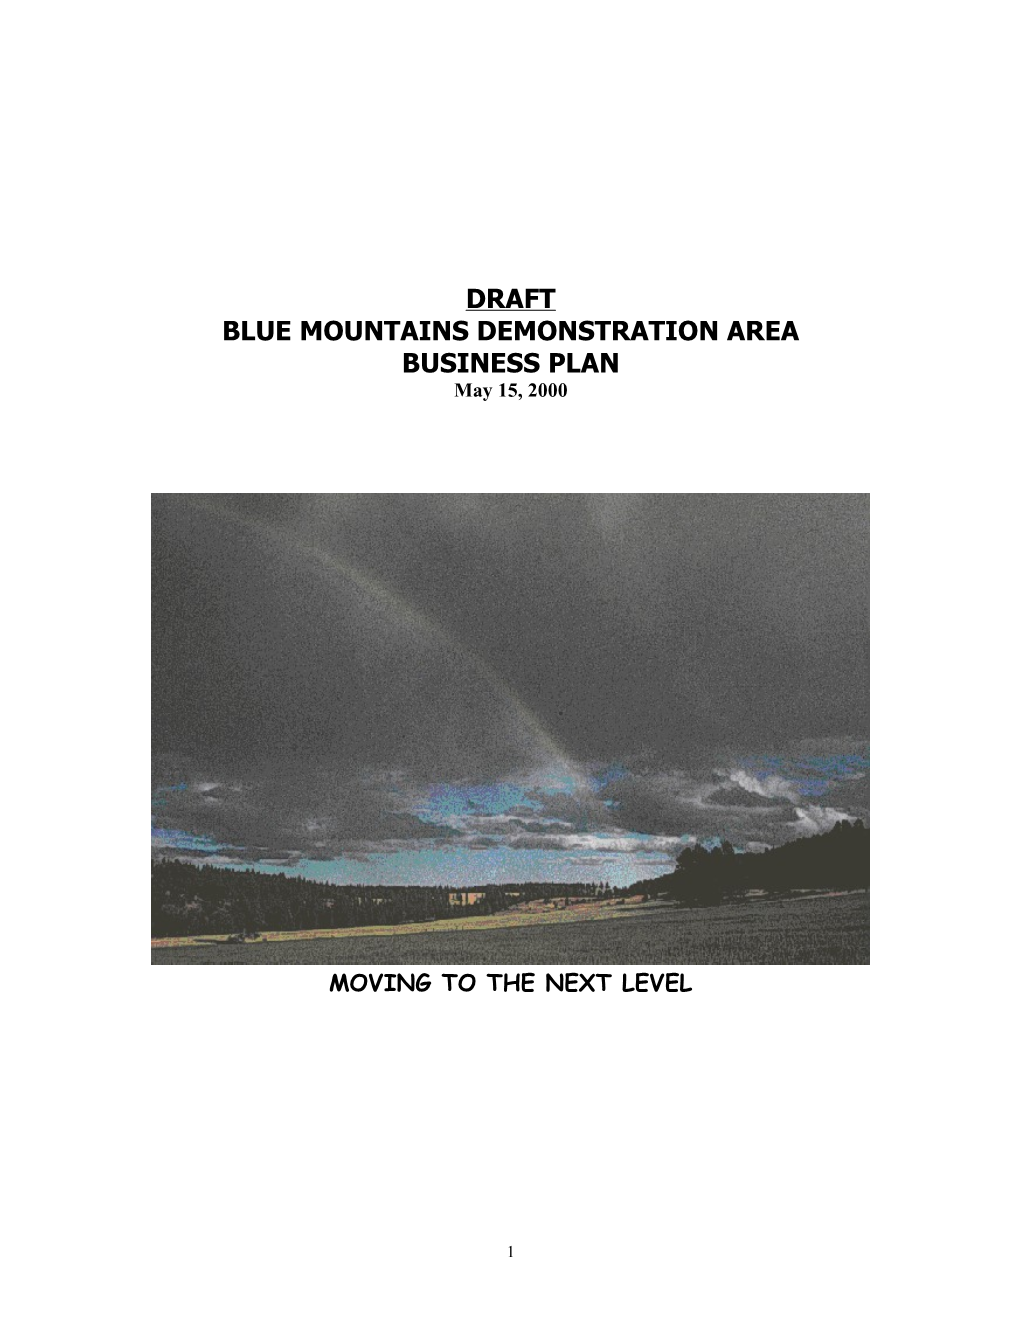 BLUE MOUNTAINS DEMONSTRATION AREA Business Plan